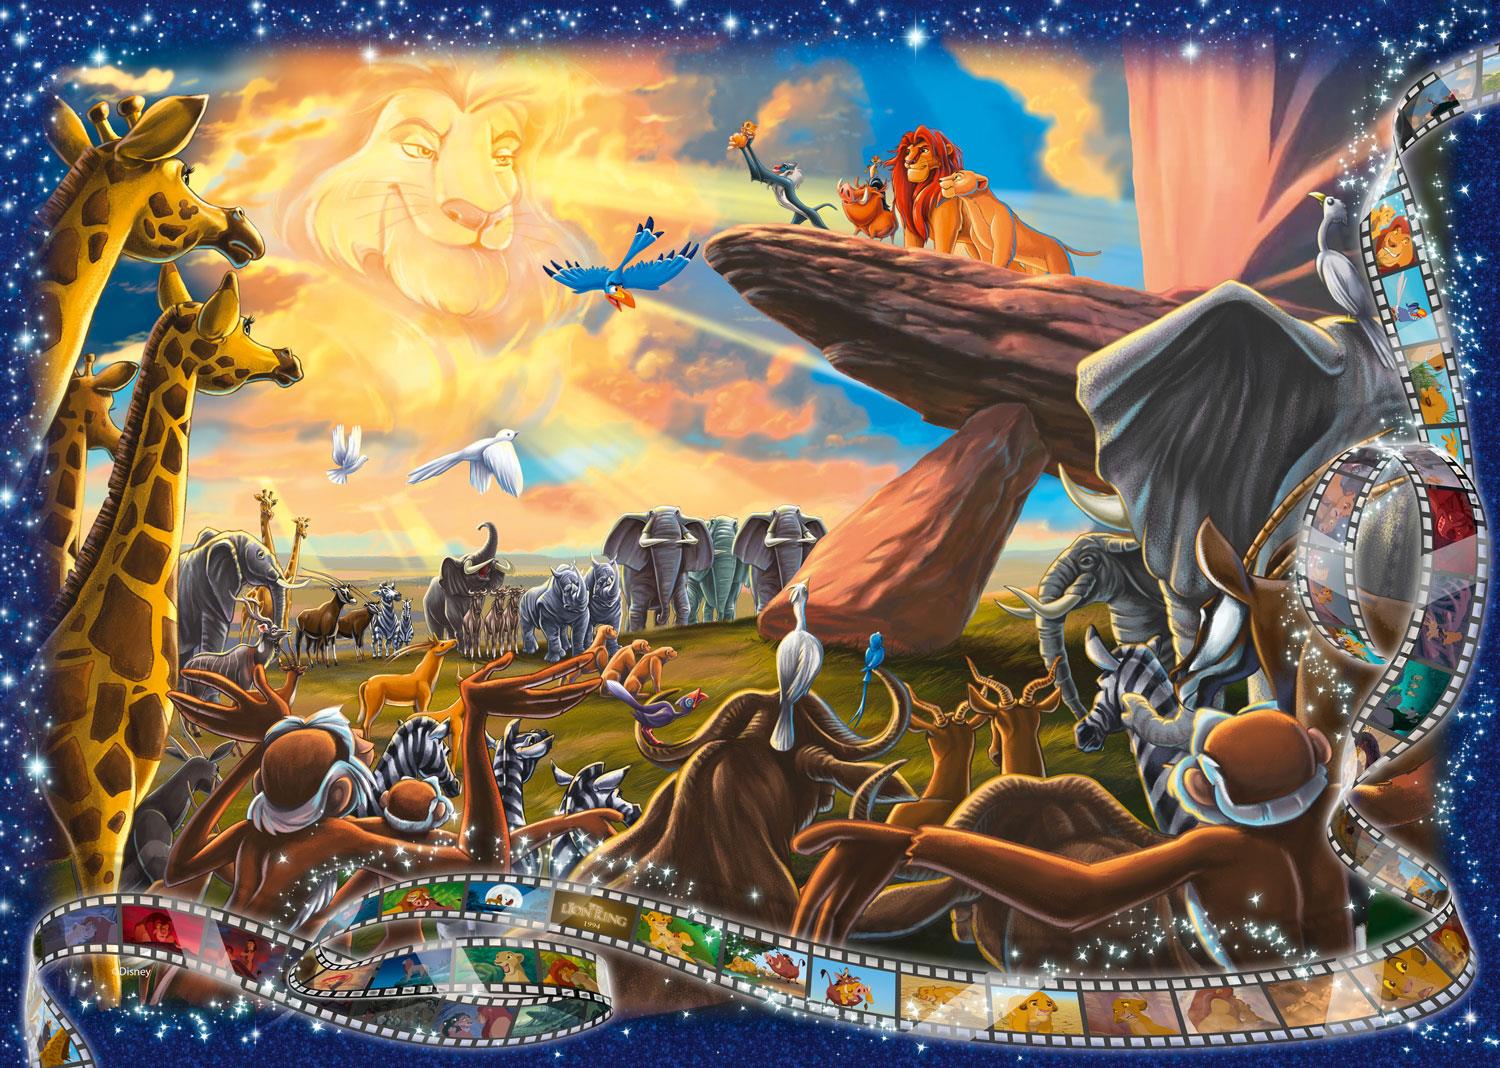 Ravensburger Disney Collector's Edition Lion King Jigsaw Puzzle (1000 Pieces)